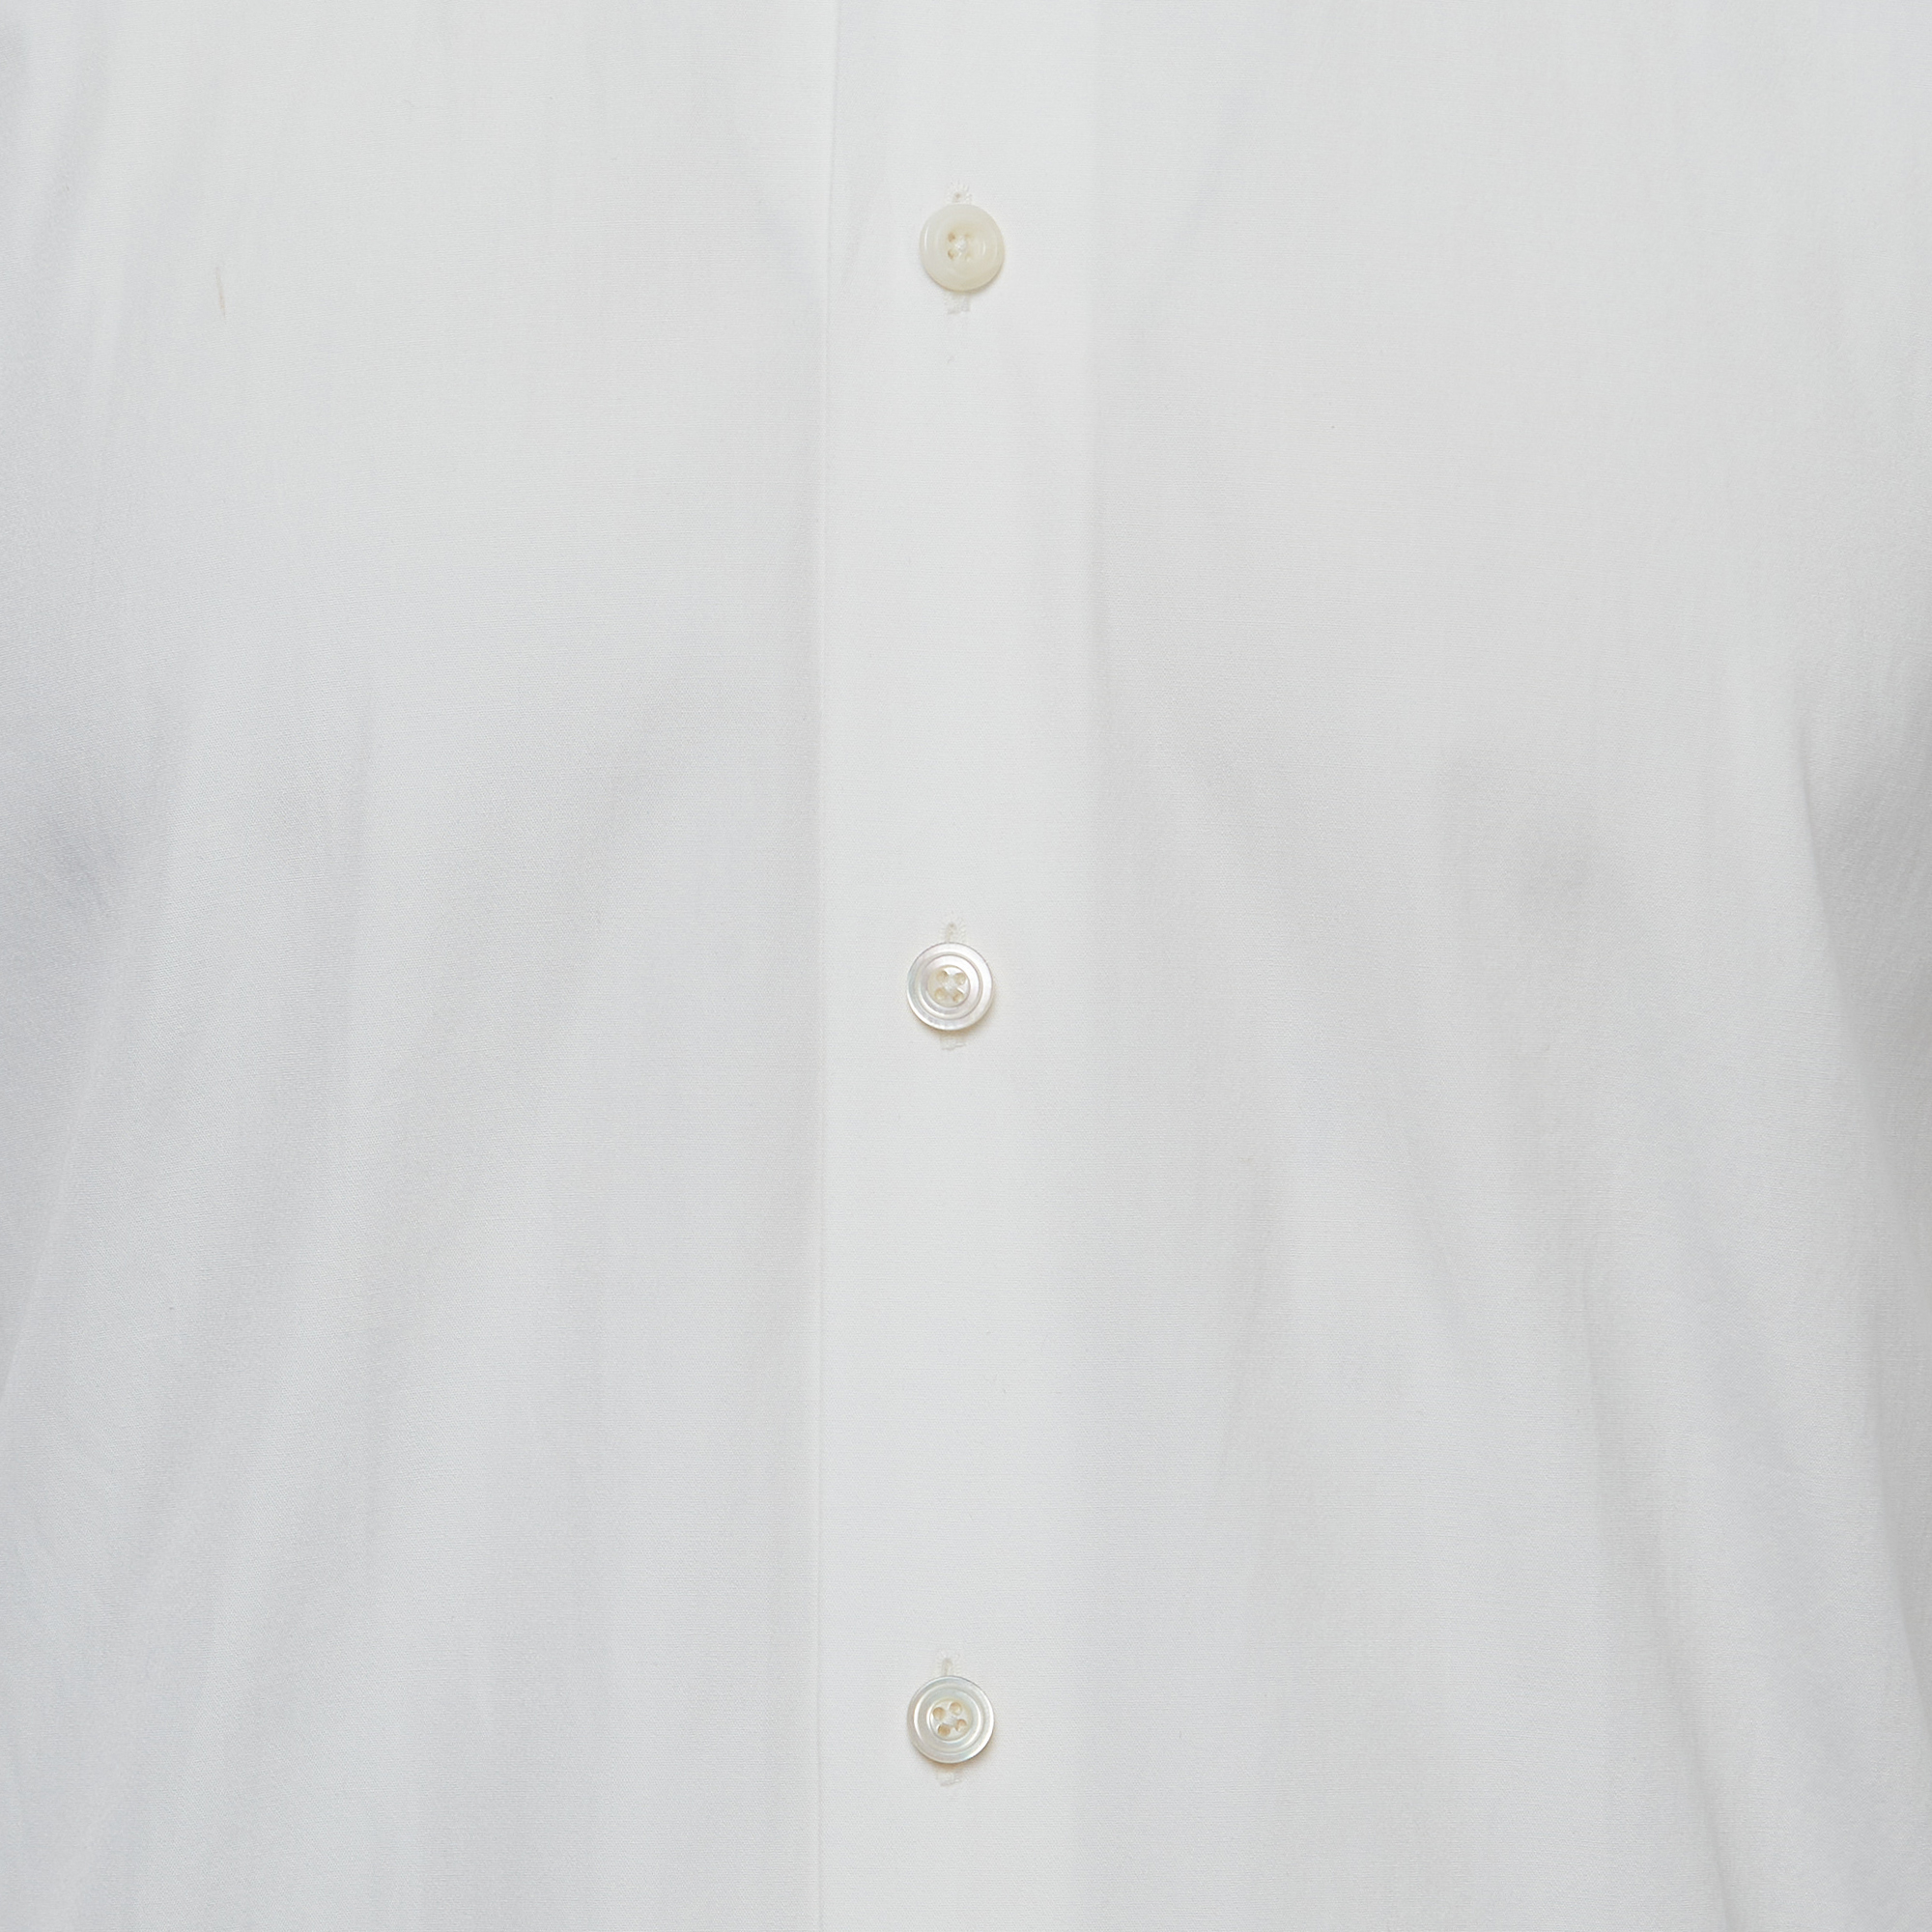 Tom Ford White Cotton Double Cuff Long Sleeve Shirt S